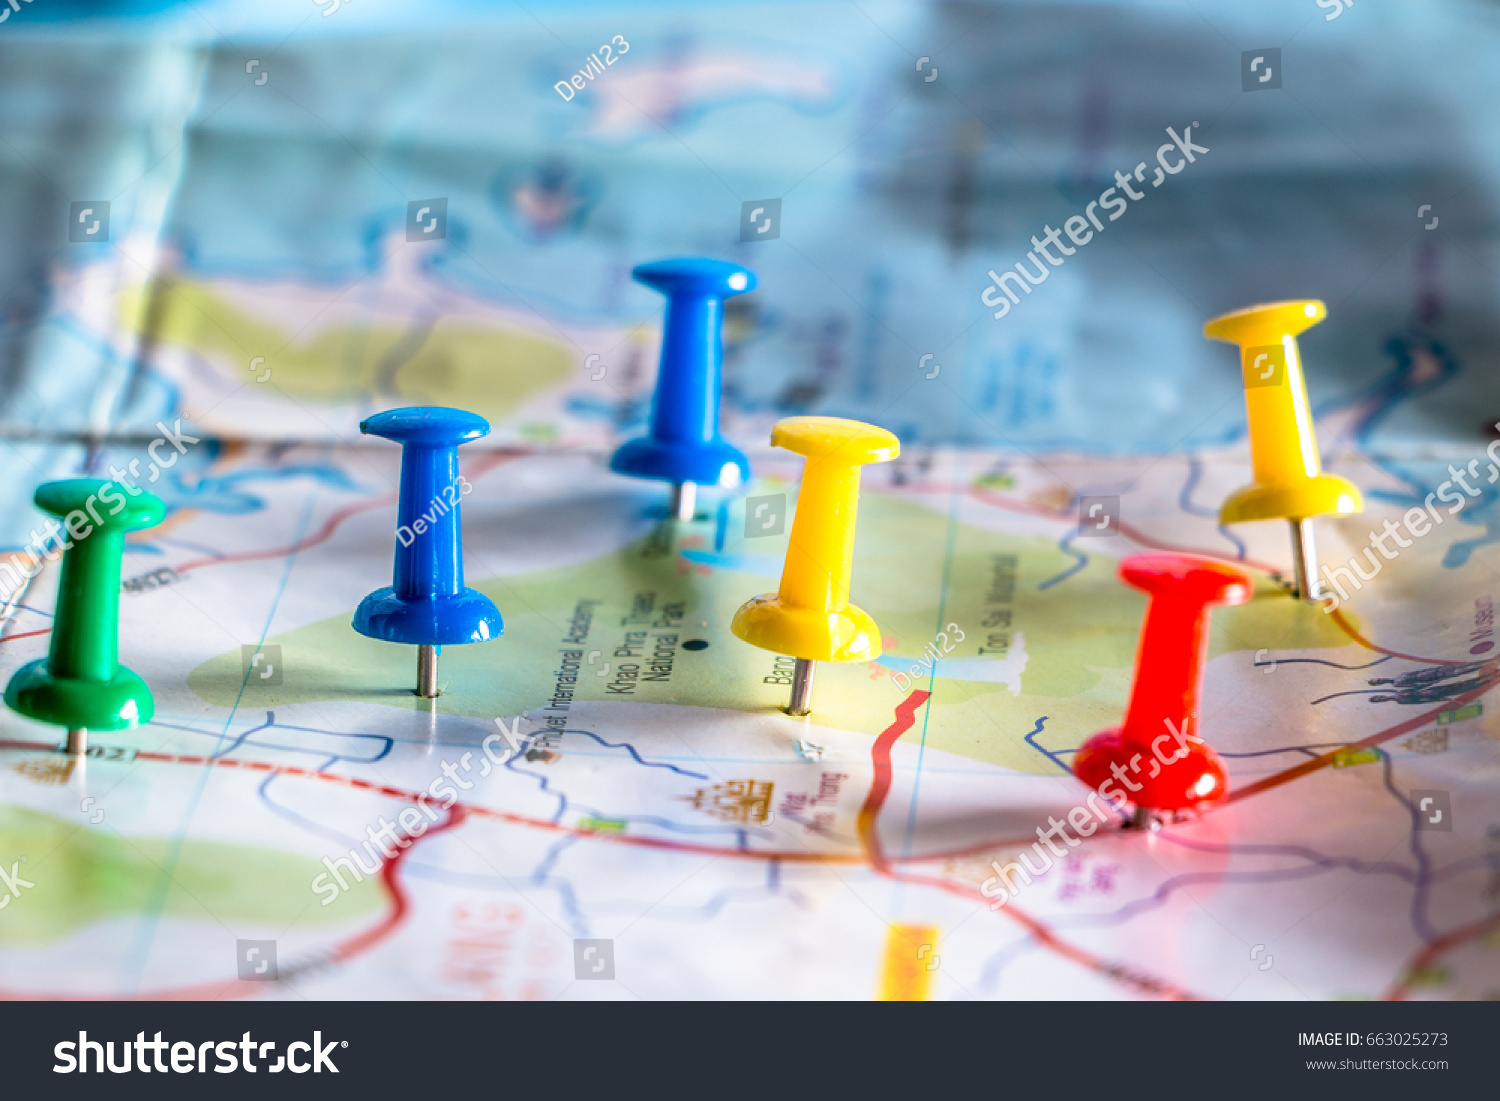 Travel destination pin points on a map with colorful thumbtacks and depth of field with select focus. #663025273